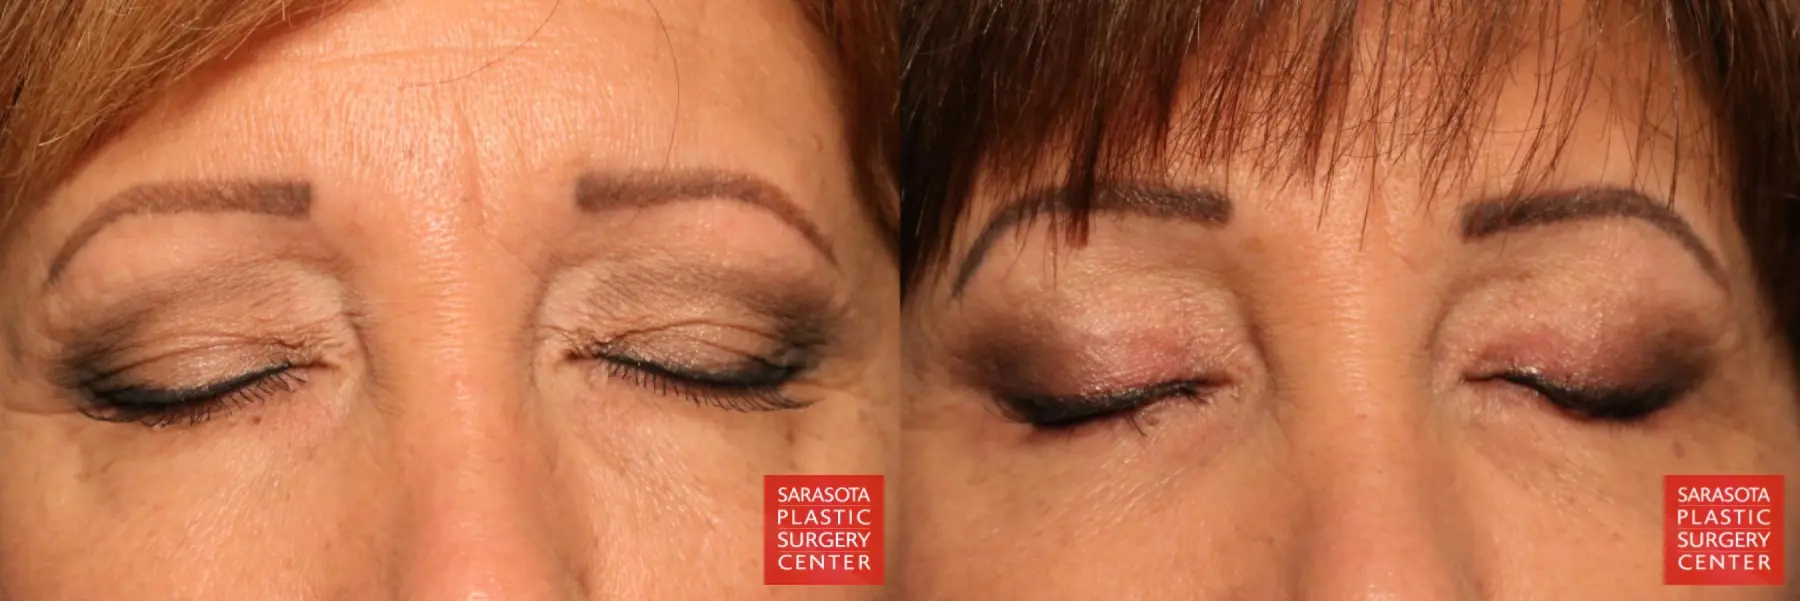 Eyelid Lift: Patient 9 - Before and After 2